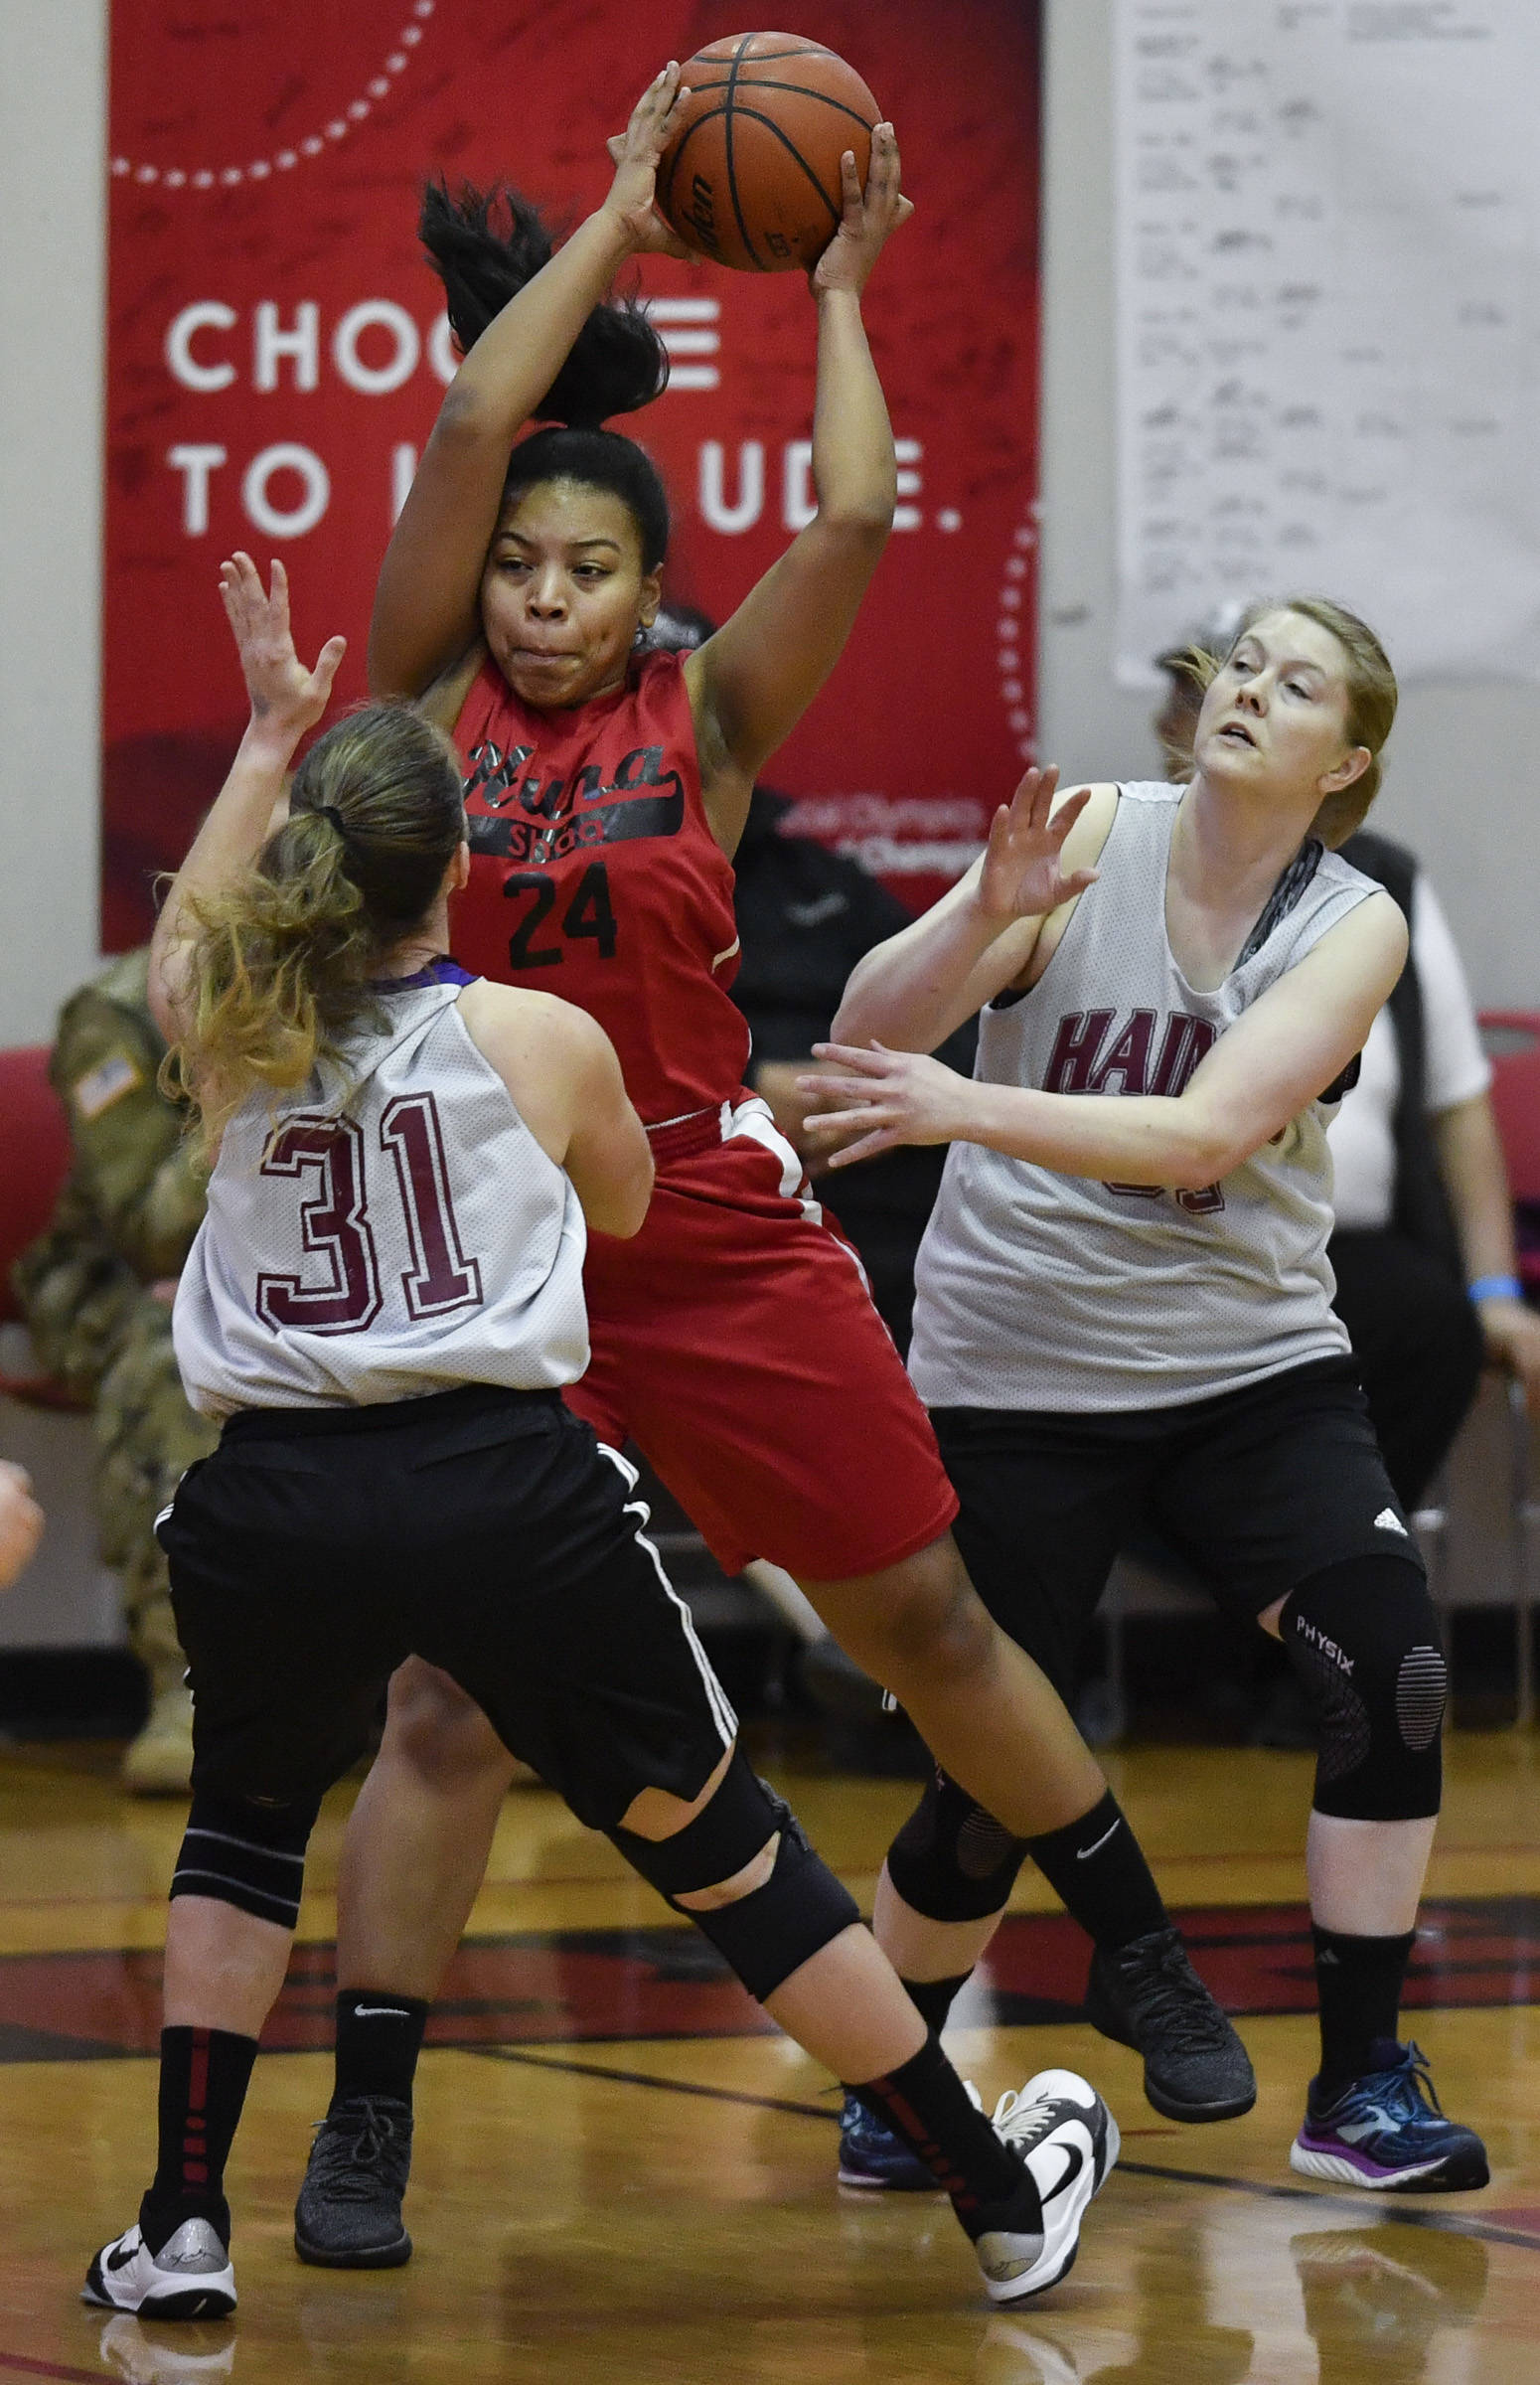 Hoonah’s Zhane White comes up with a rebound between Haines’ Rachel Brittenham, left, and Sabrina Stickler in the women’s bracket game at the Gold Medal Basketball Tournament on Thursday, March 21, 2019. (Michael Penn | Juneau Empire)